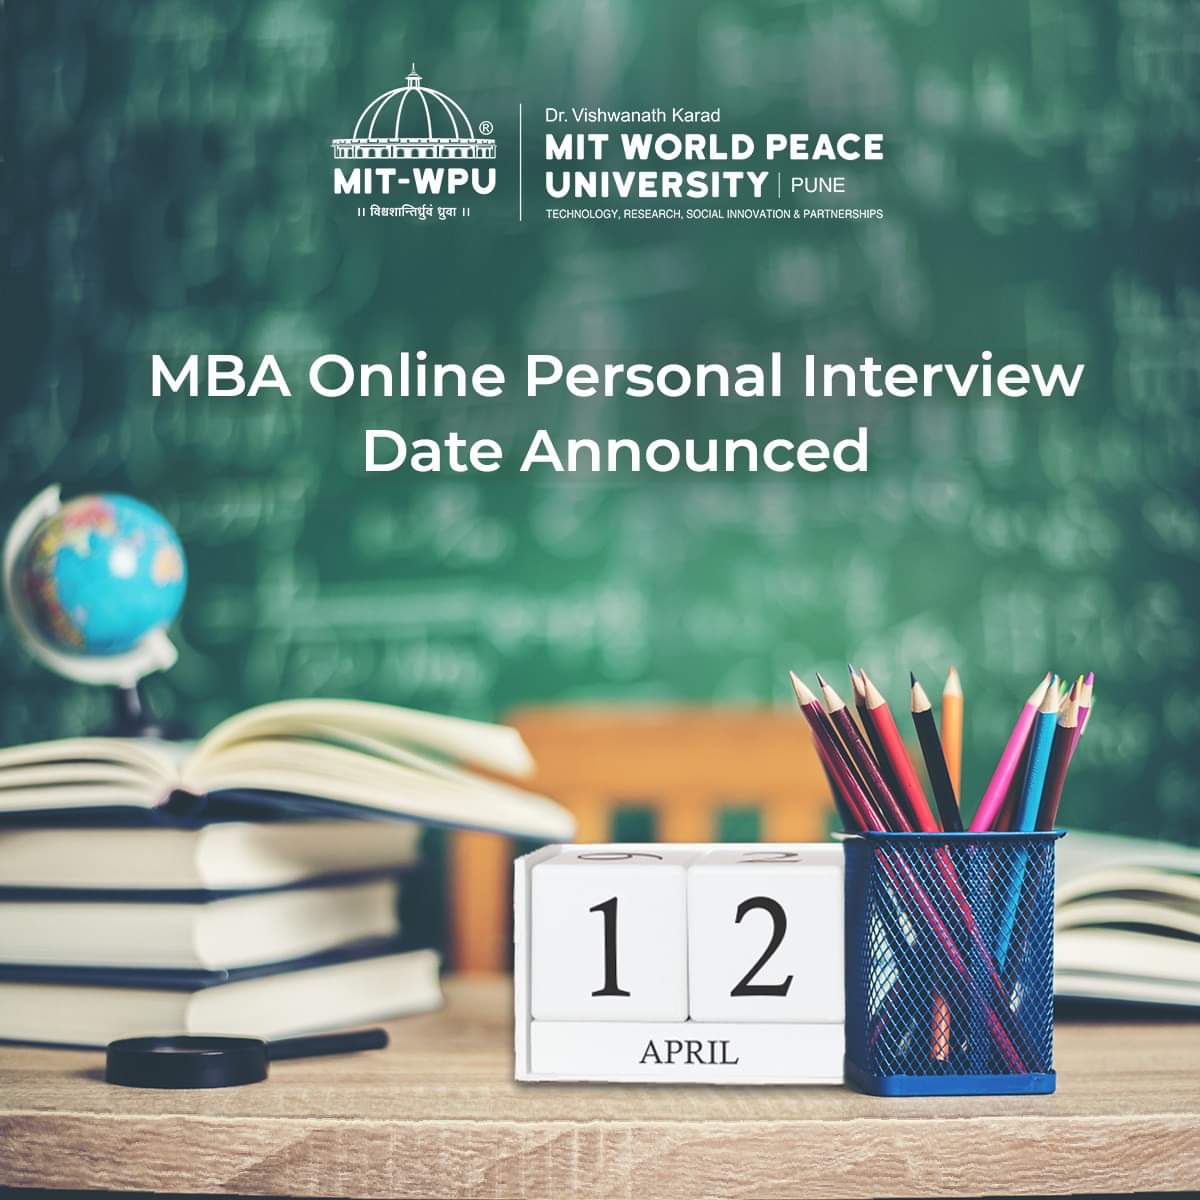 Attention #MBA aspirant!
MIT-WPU will be conducting online Personal Interview (PI) only for the MBA program (ranked 2nd best in Pune) on 12th April, 2020. Complete your application to be eligible for the PI session: admissions.mitwpu.edu.in/mba/ #LearnWhatMatters #Covid19 #MITPune